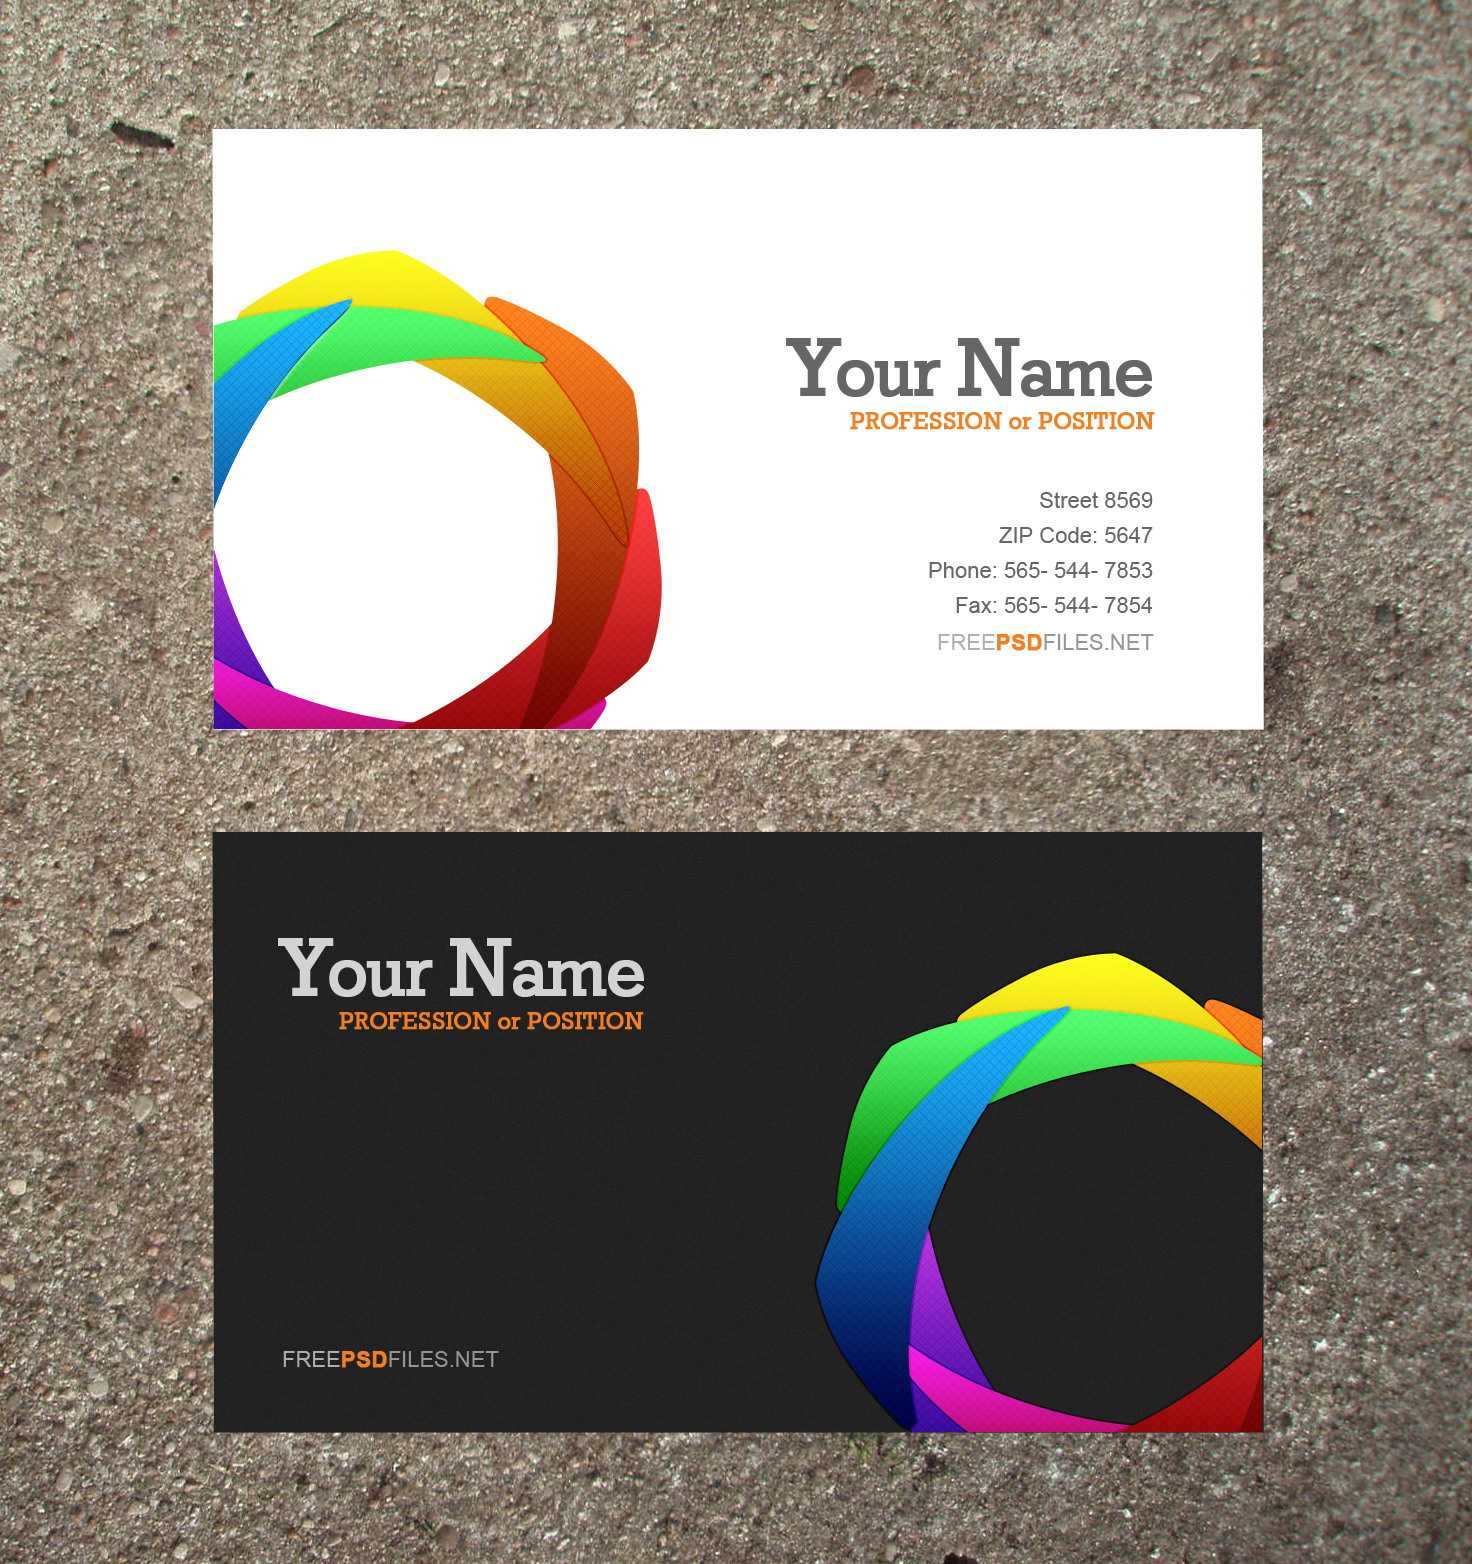 Make Your Own Business Card Design Free – Veppe Inside Blank Business Card Template For Word